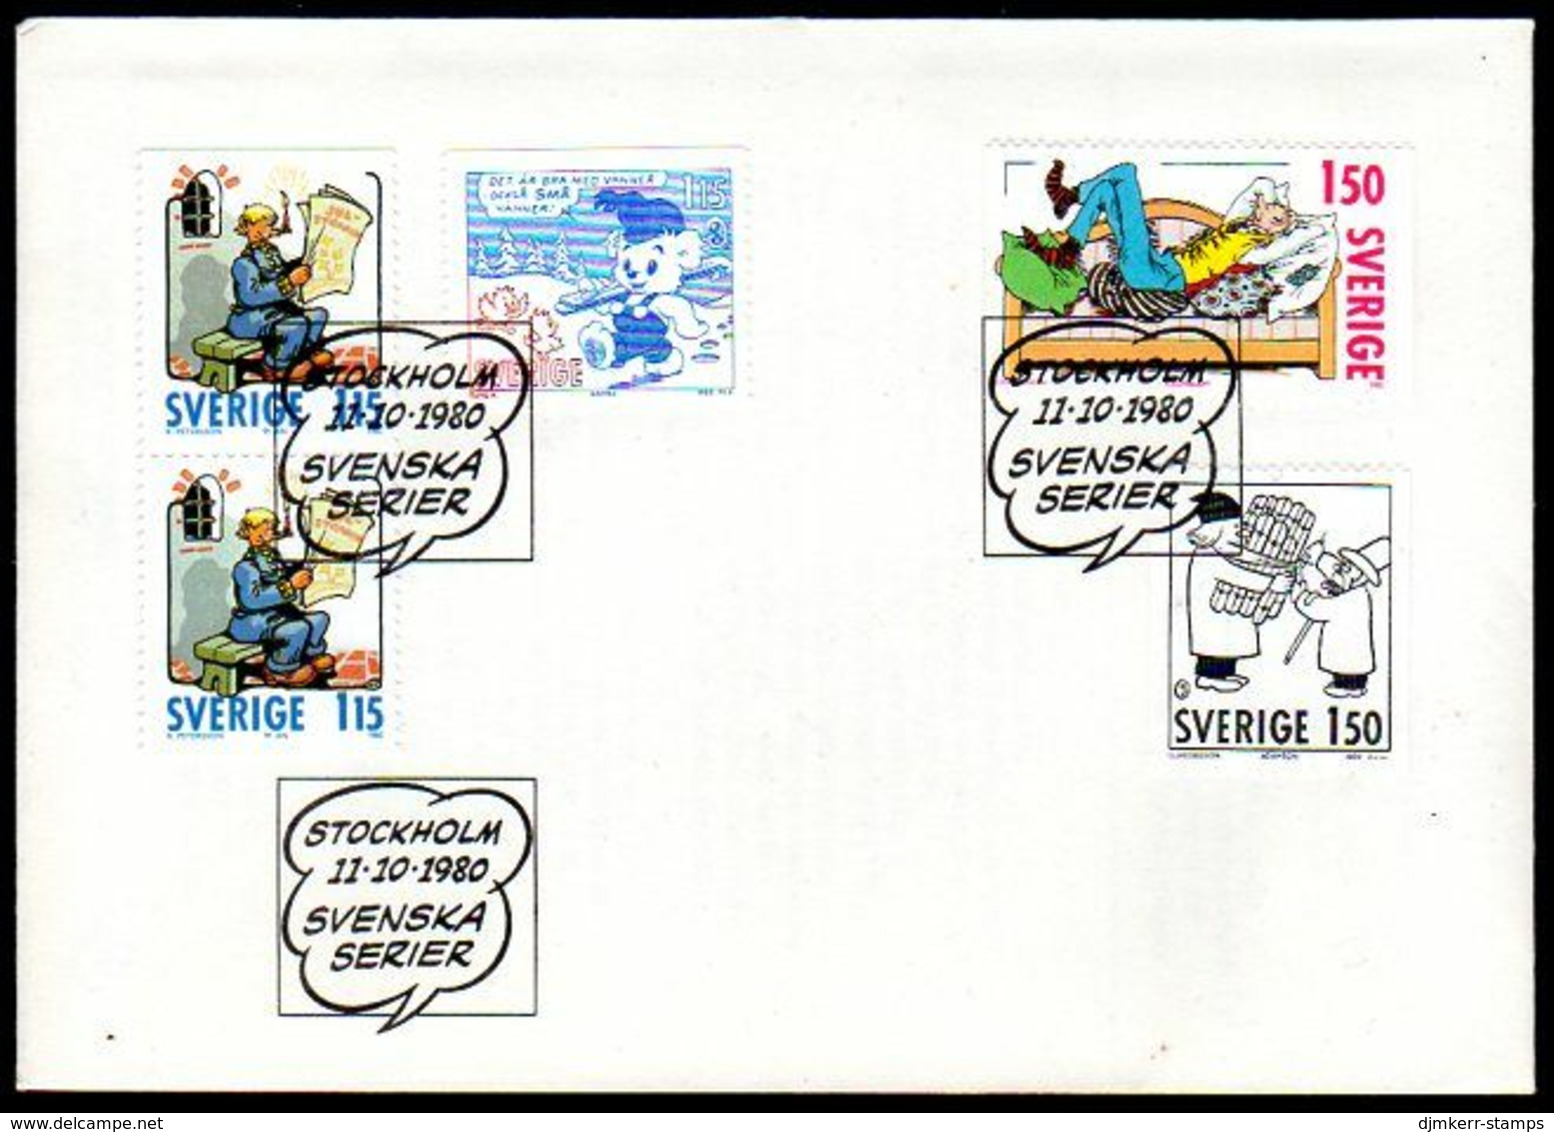 SWEDEN 1980 Comic Characters FDC.  Michel 1124-27 - FDC